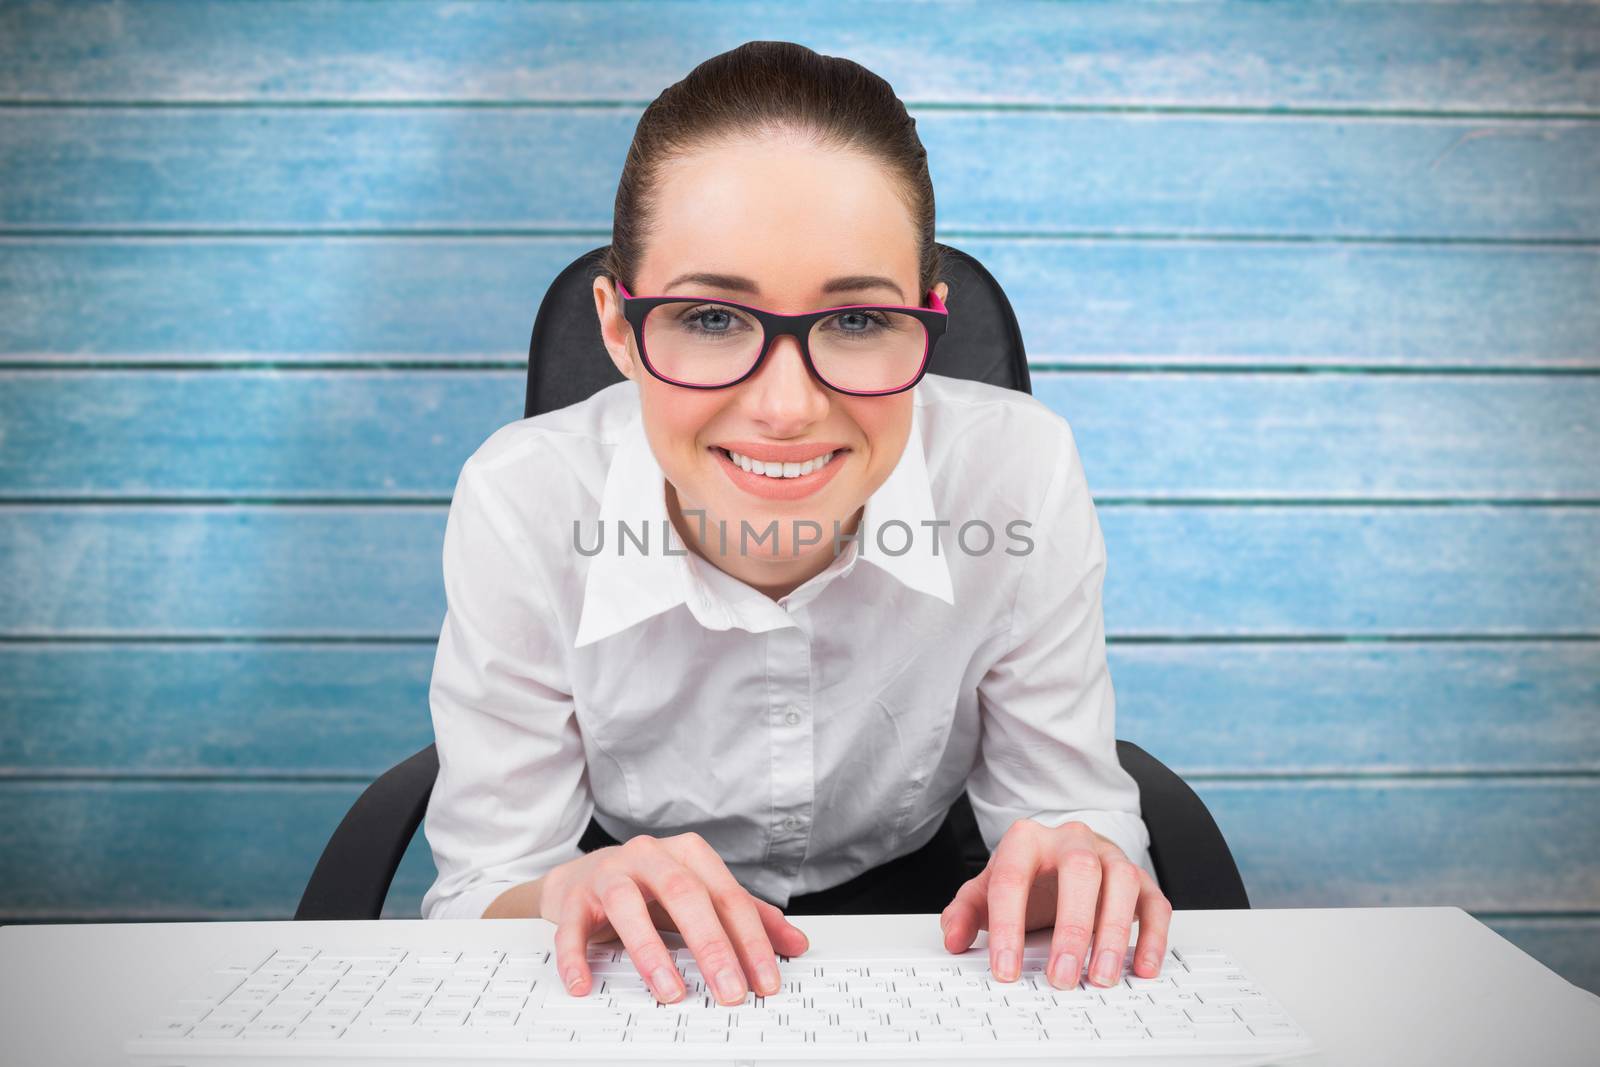 Businesswoman typing on a keyboard against wooden planks